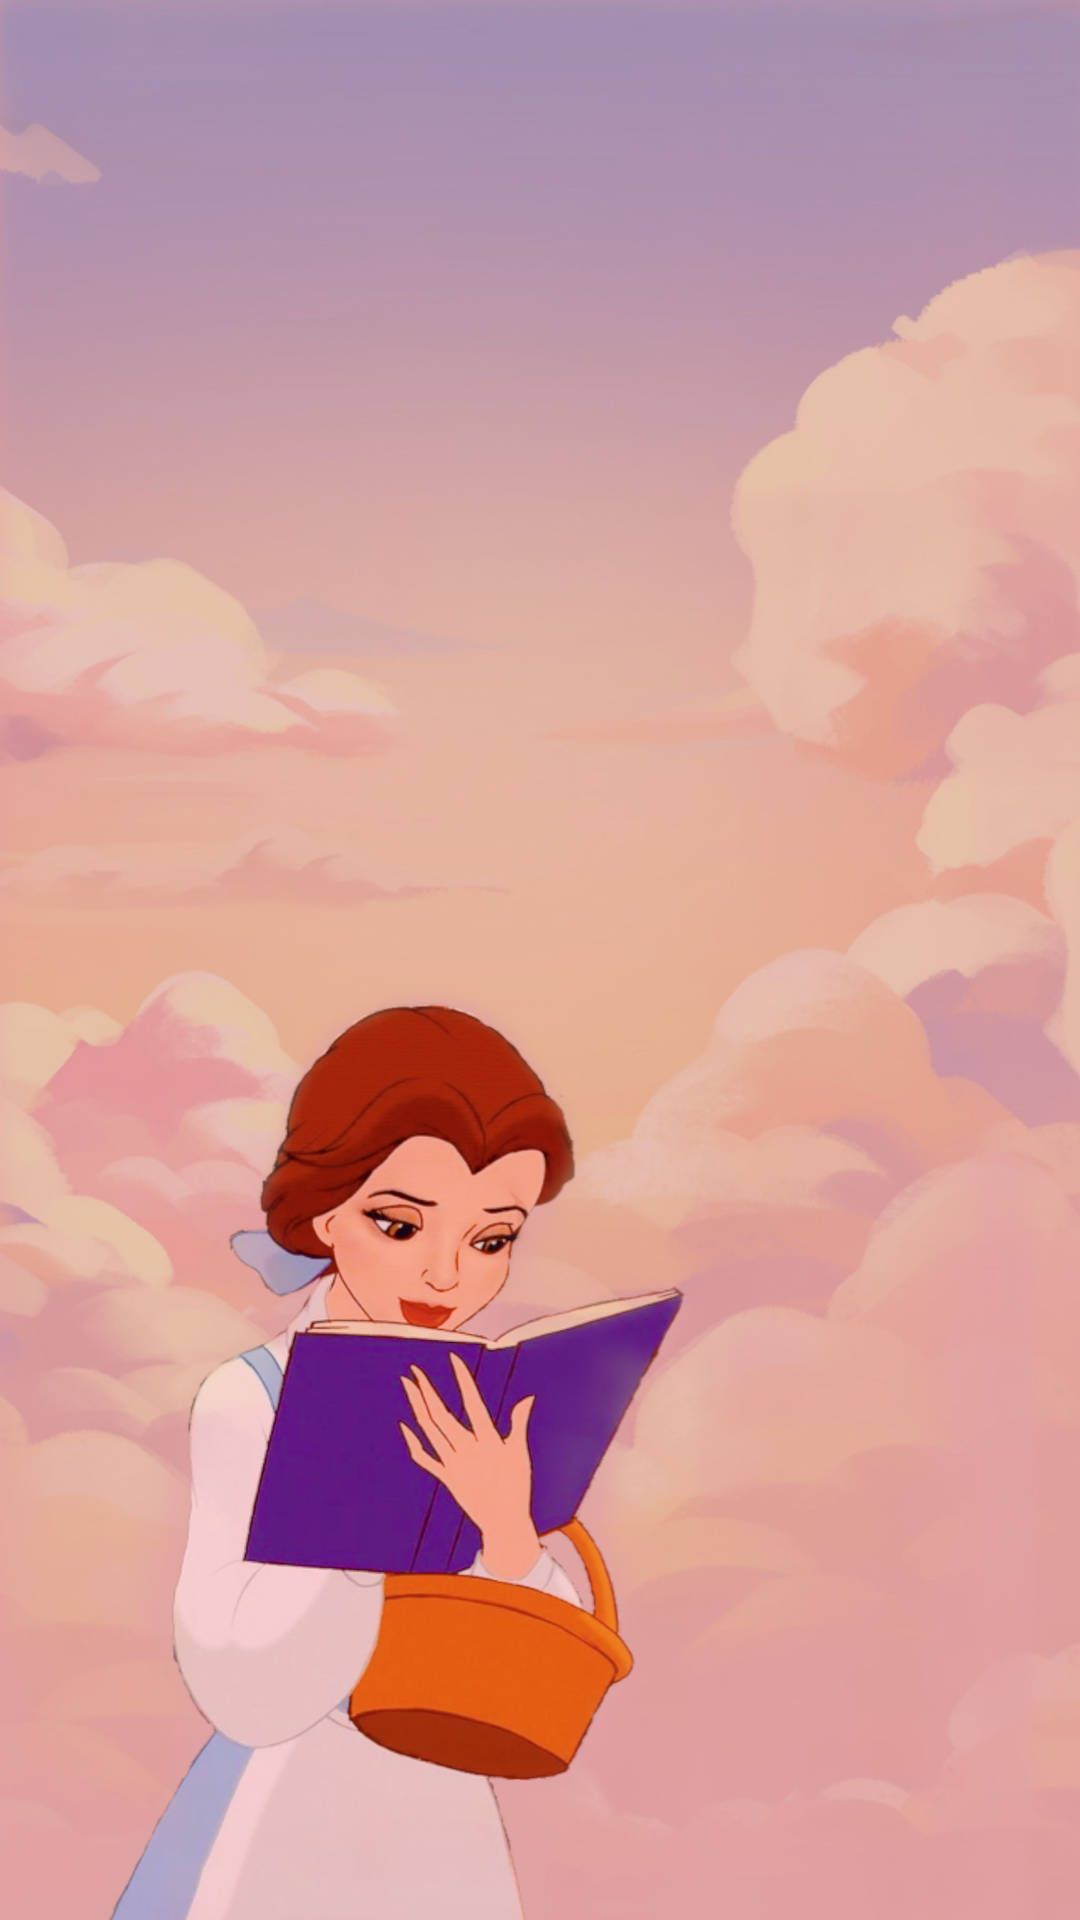 Belle reading a book in the clouds - Princess, Belle